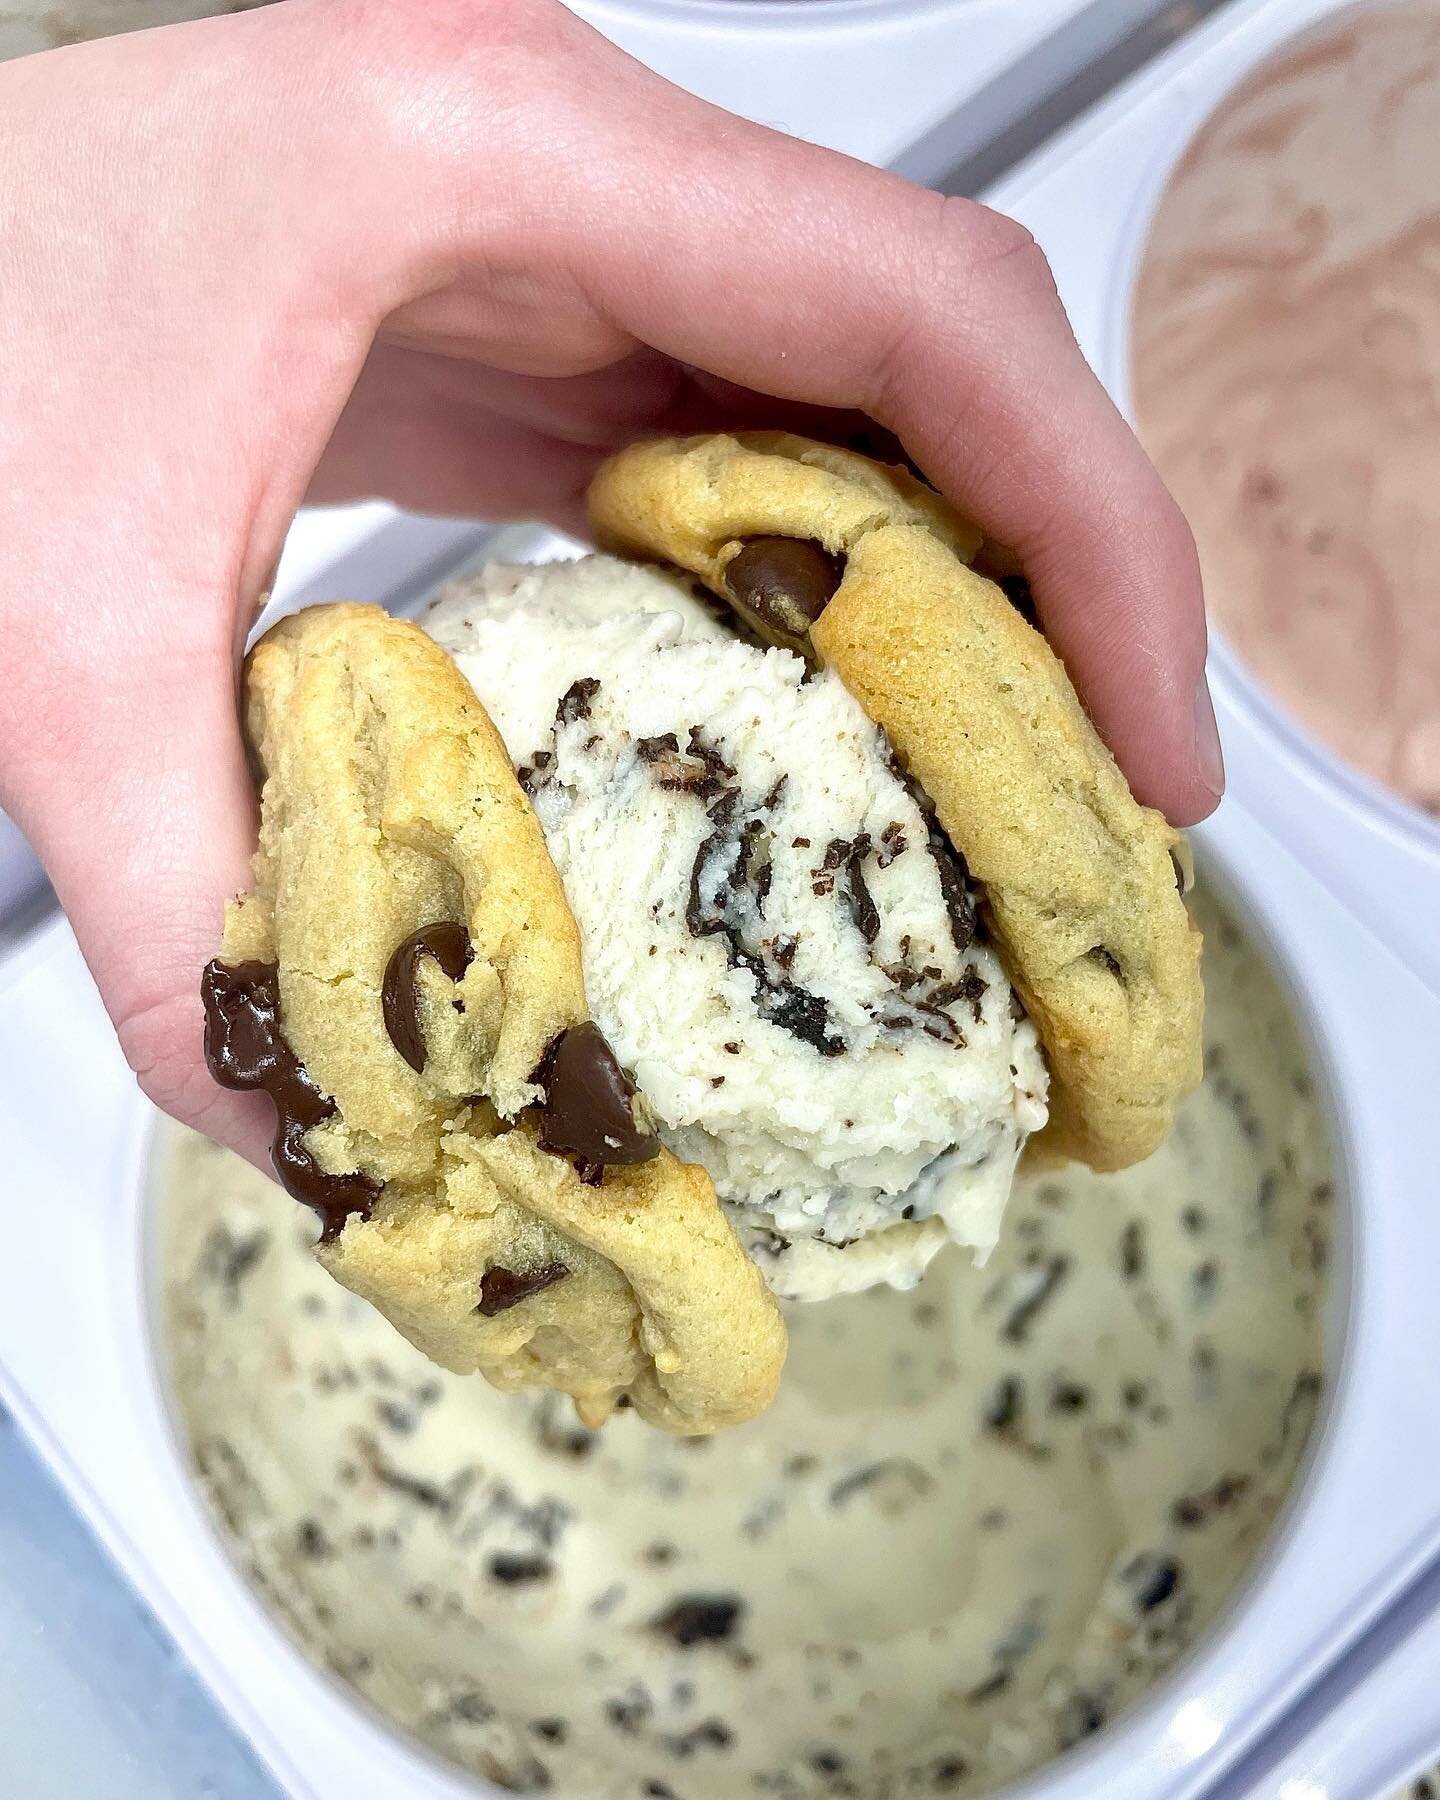 Non-dairy vegan flavors are back in stock 🍦🍦🍦

We&rsquo;ve been sold out of non-dairy flavors since early summer but will have a rotating flavor for the rest of the year!

🍪 Classic Chocolate Chip
🍦 Vanilla Chocolate Chip (non-dairy)- Classic va